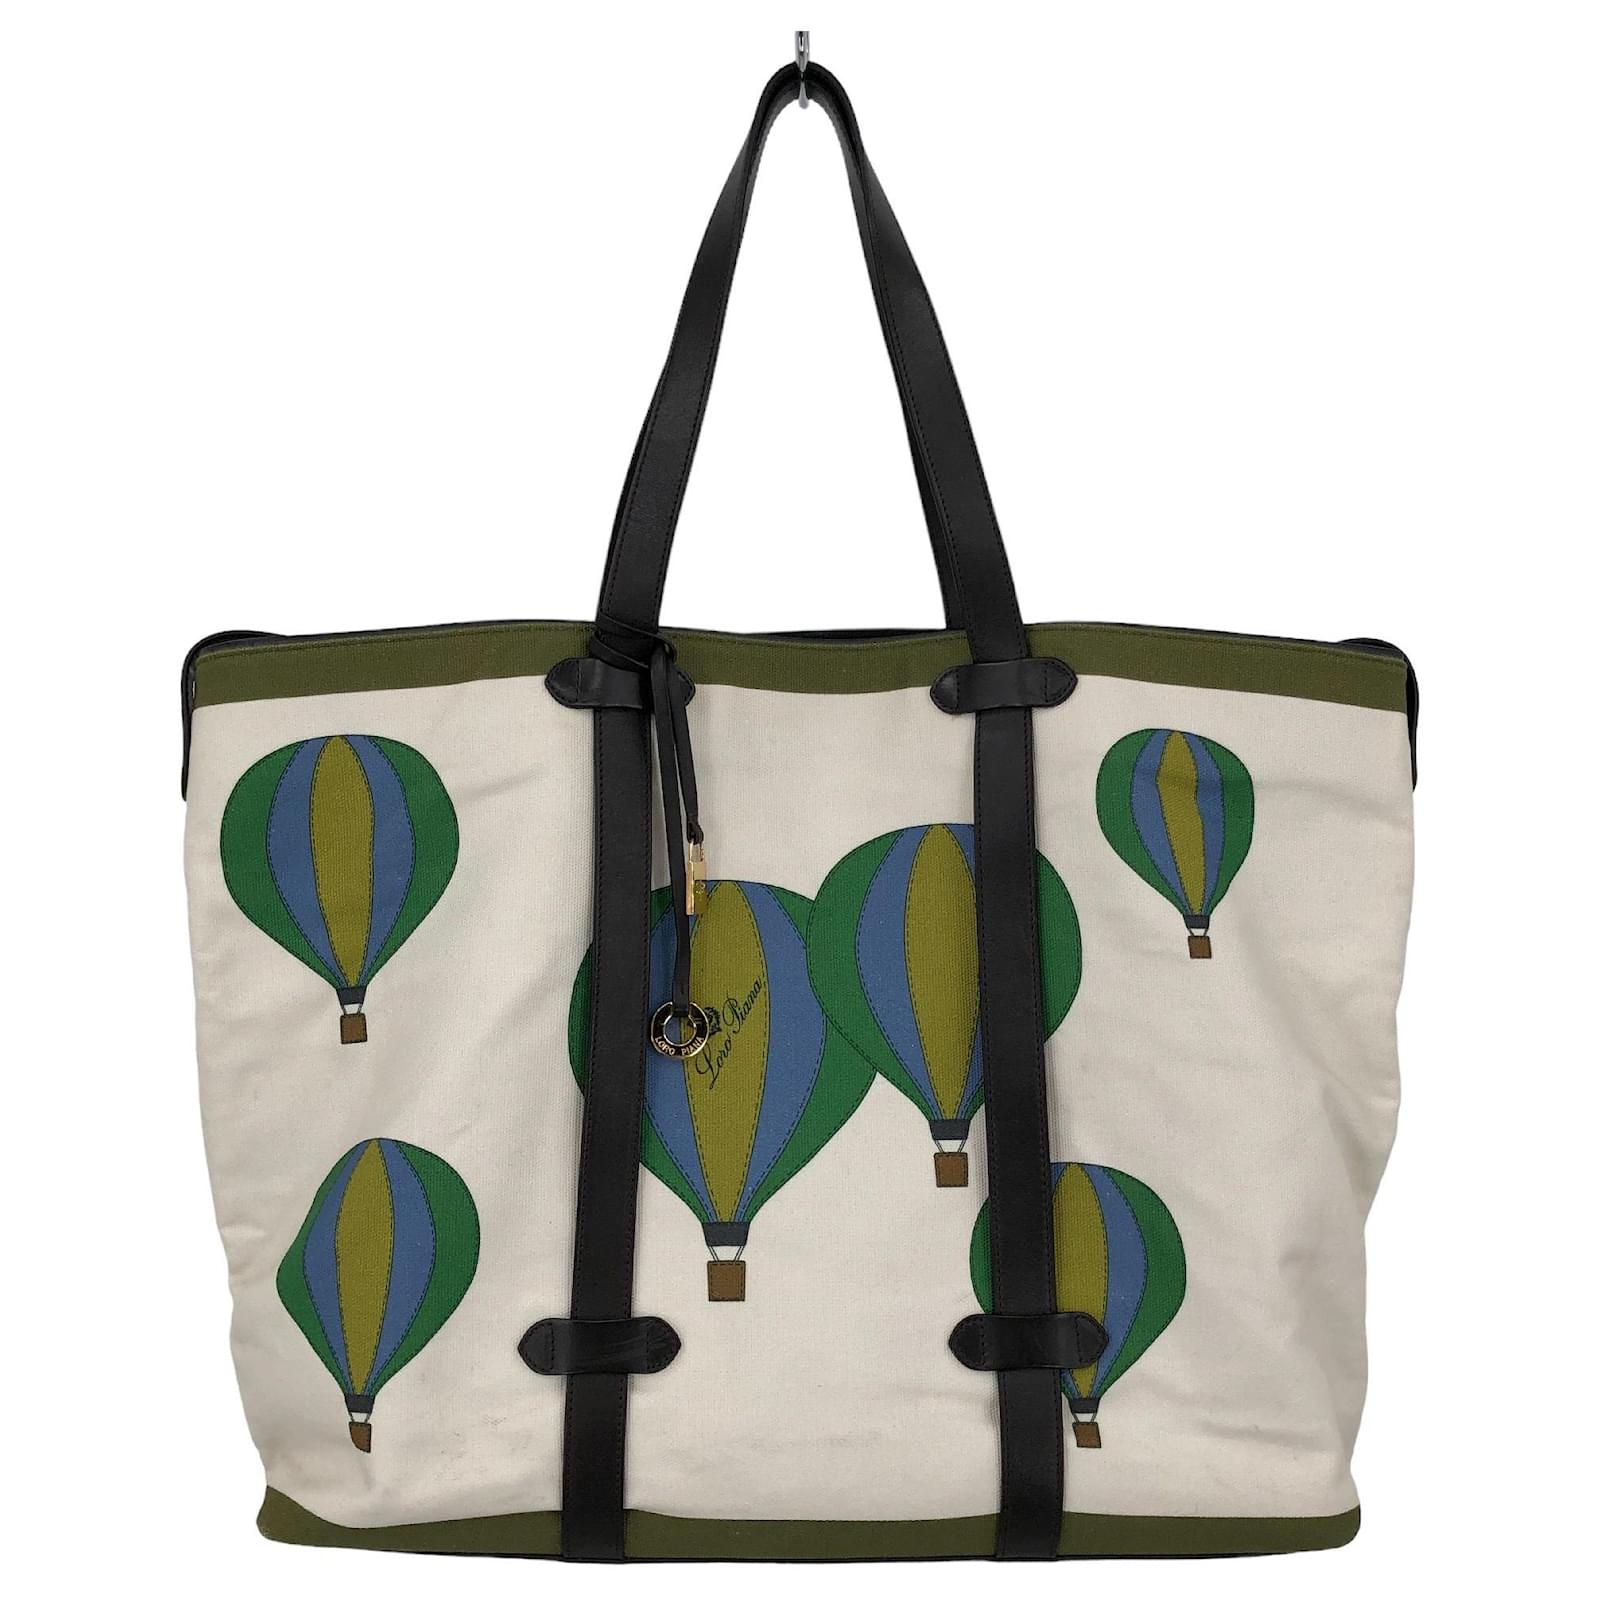 Totes Loro Piana Loro Piana Tote Bag in White Canvas with Green and Blue Balloons